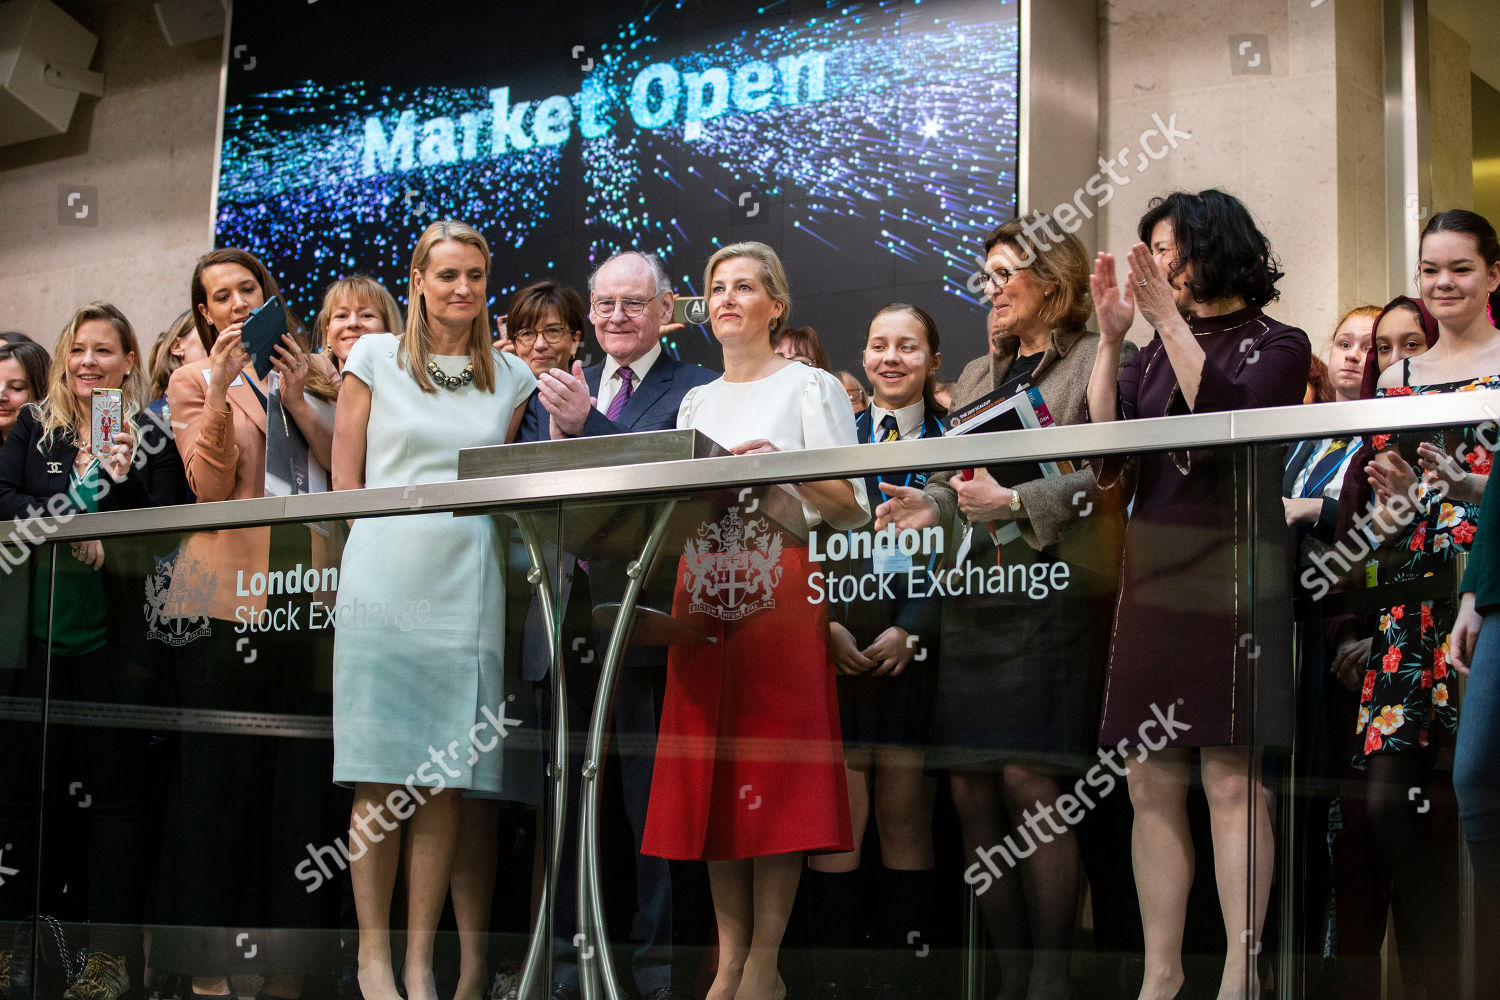 sophie-countess-of-wessex-attends-womens-network-forum-and-market-opening-ceremony-international-womens-day-london-uk-08-mar-2019-shutterstock-editorial-10147941u.jpg